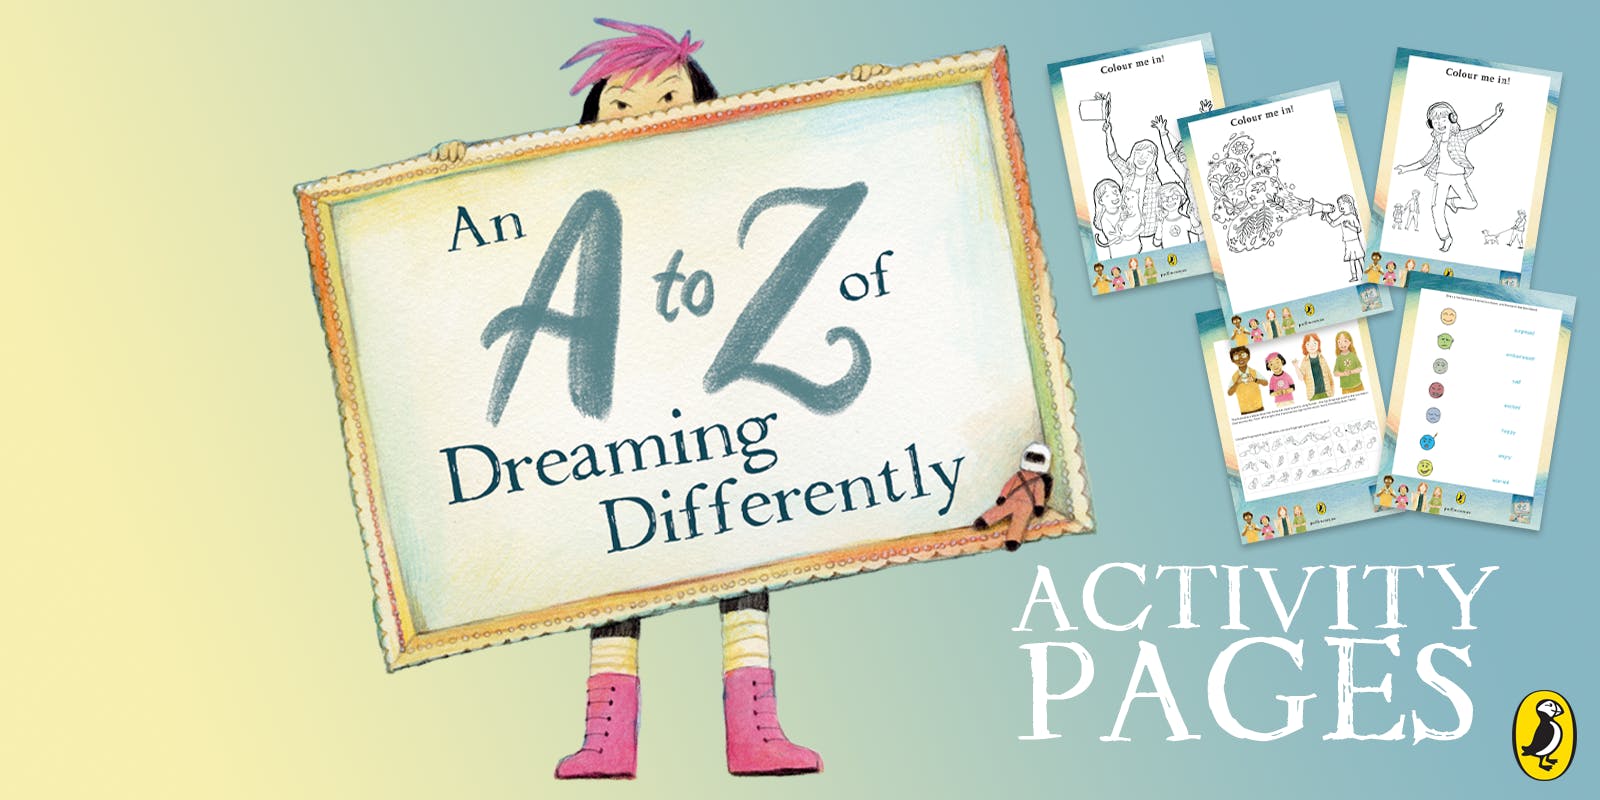 An A to Z of Dreaming Differently Activity